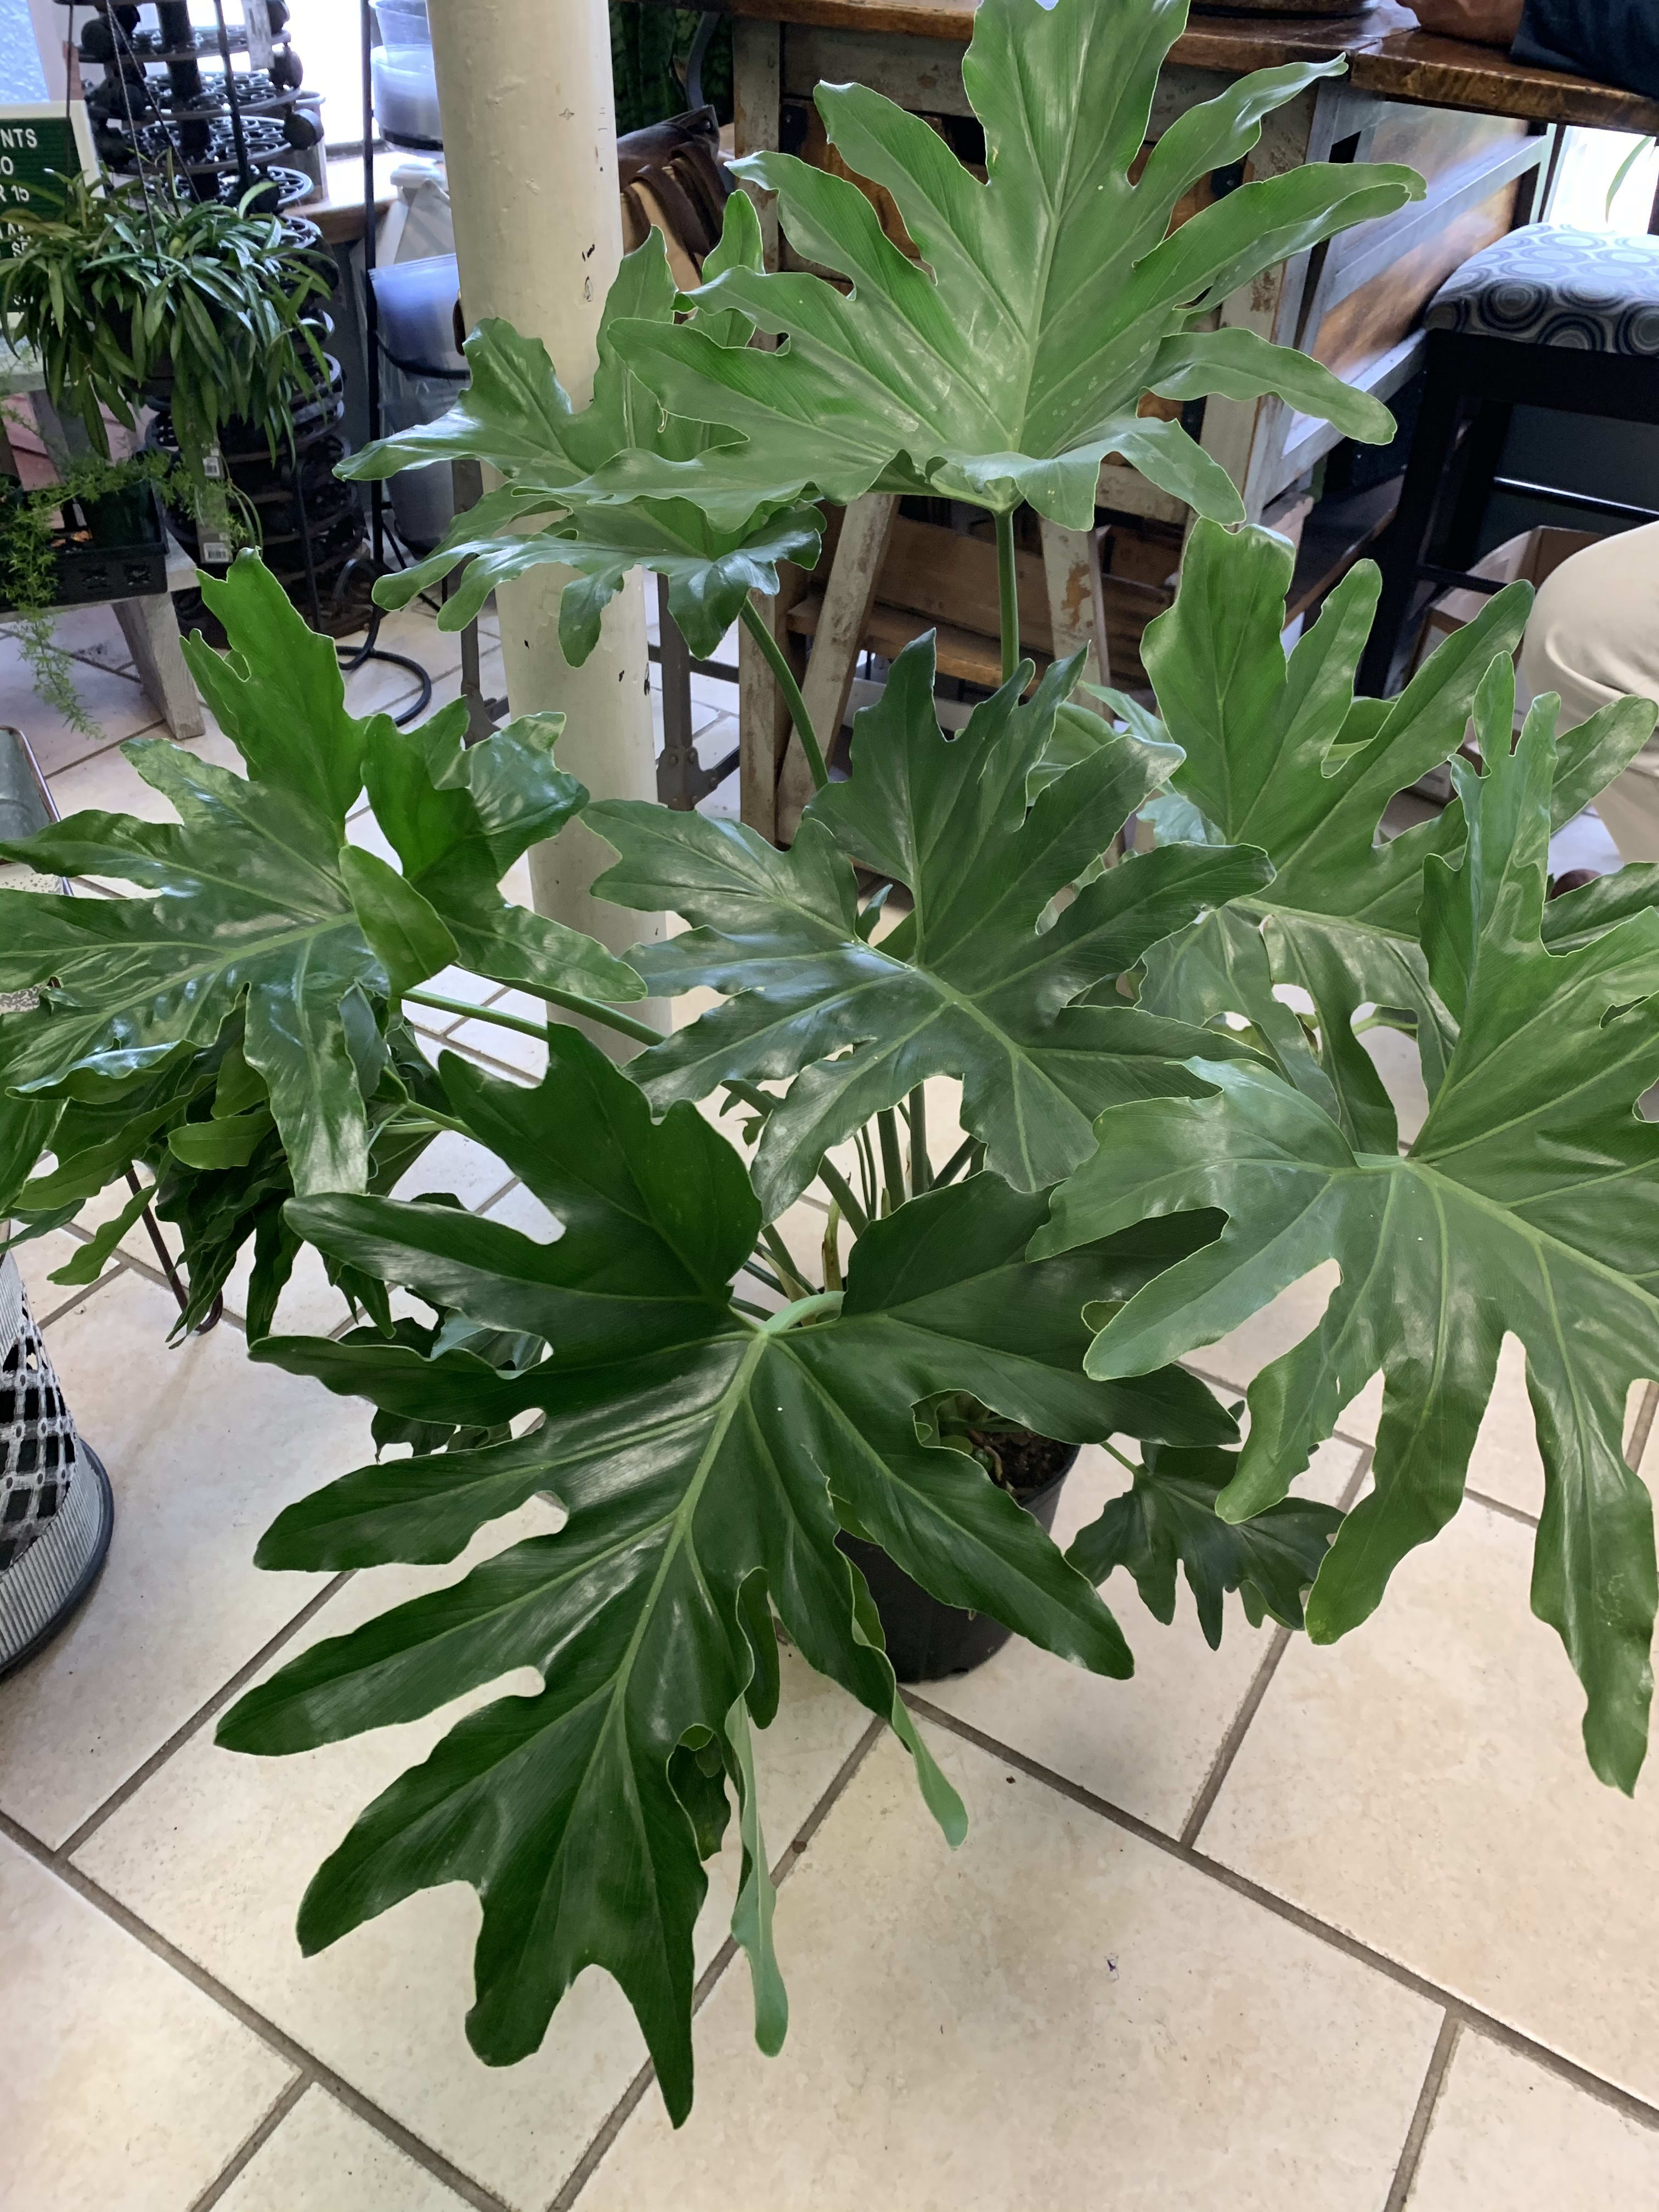 Philodendron Houseplant - 10” Philodendron Houseplant. This beautiful foliage plant has full glossy leaves and requires bright light. Great for indoor use to brighten any room!